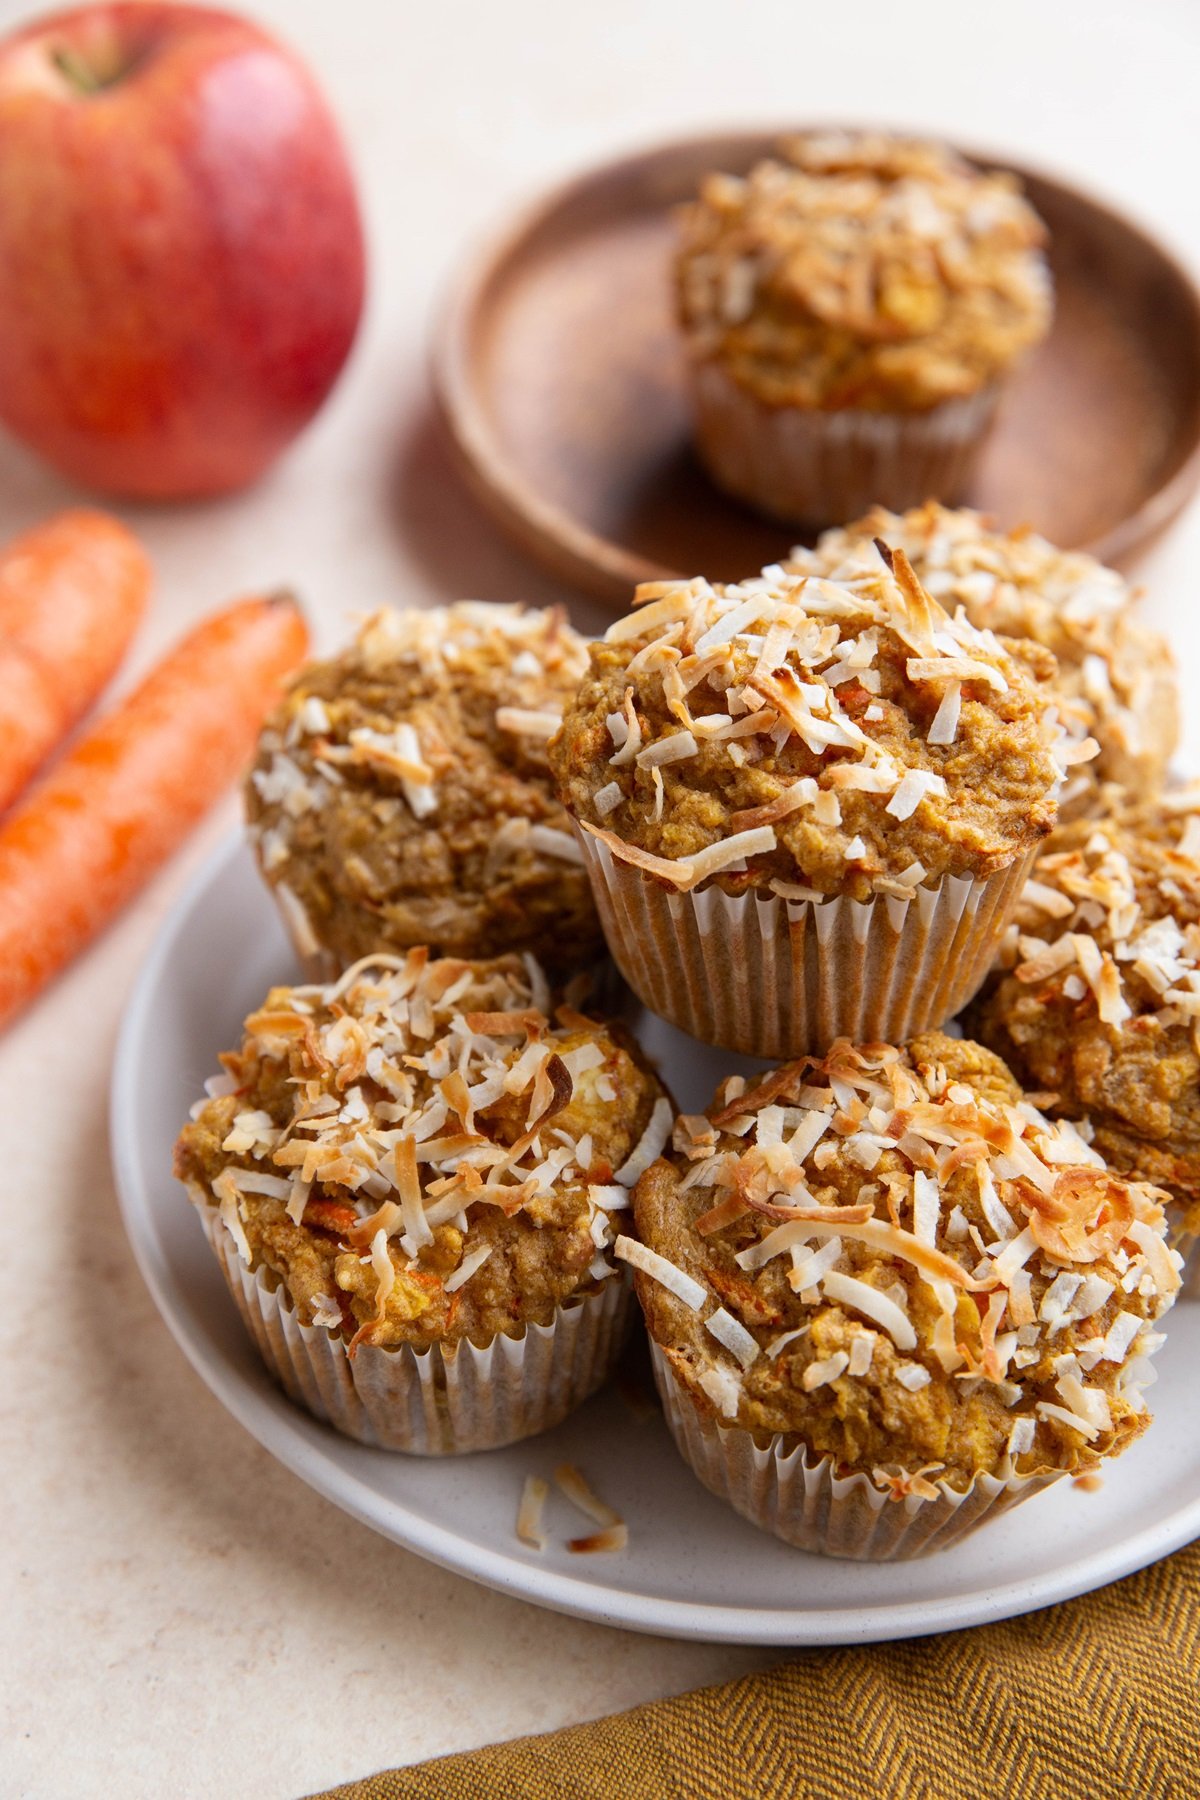 Plate of carrot muffins with fresh carrots and an apple in the background.